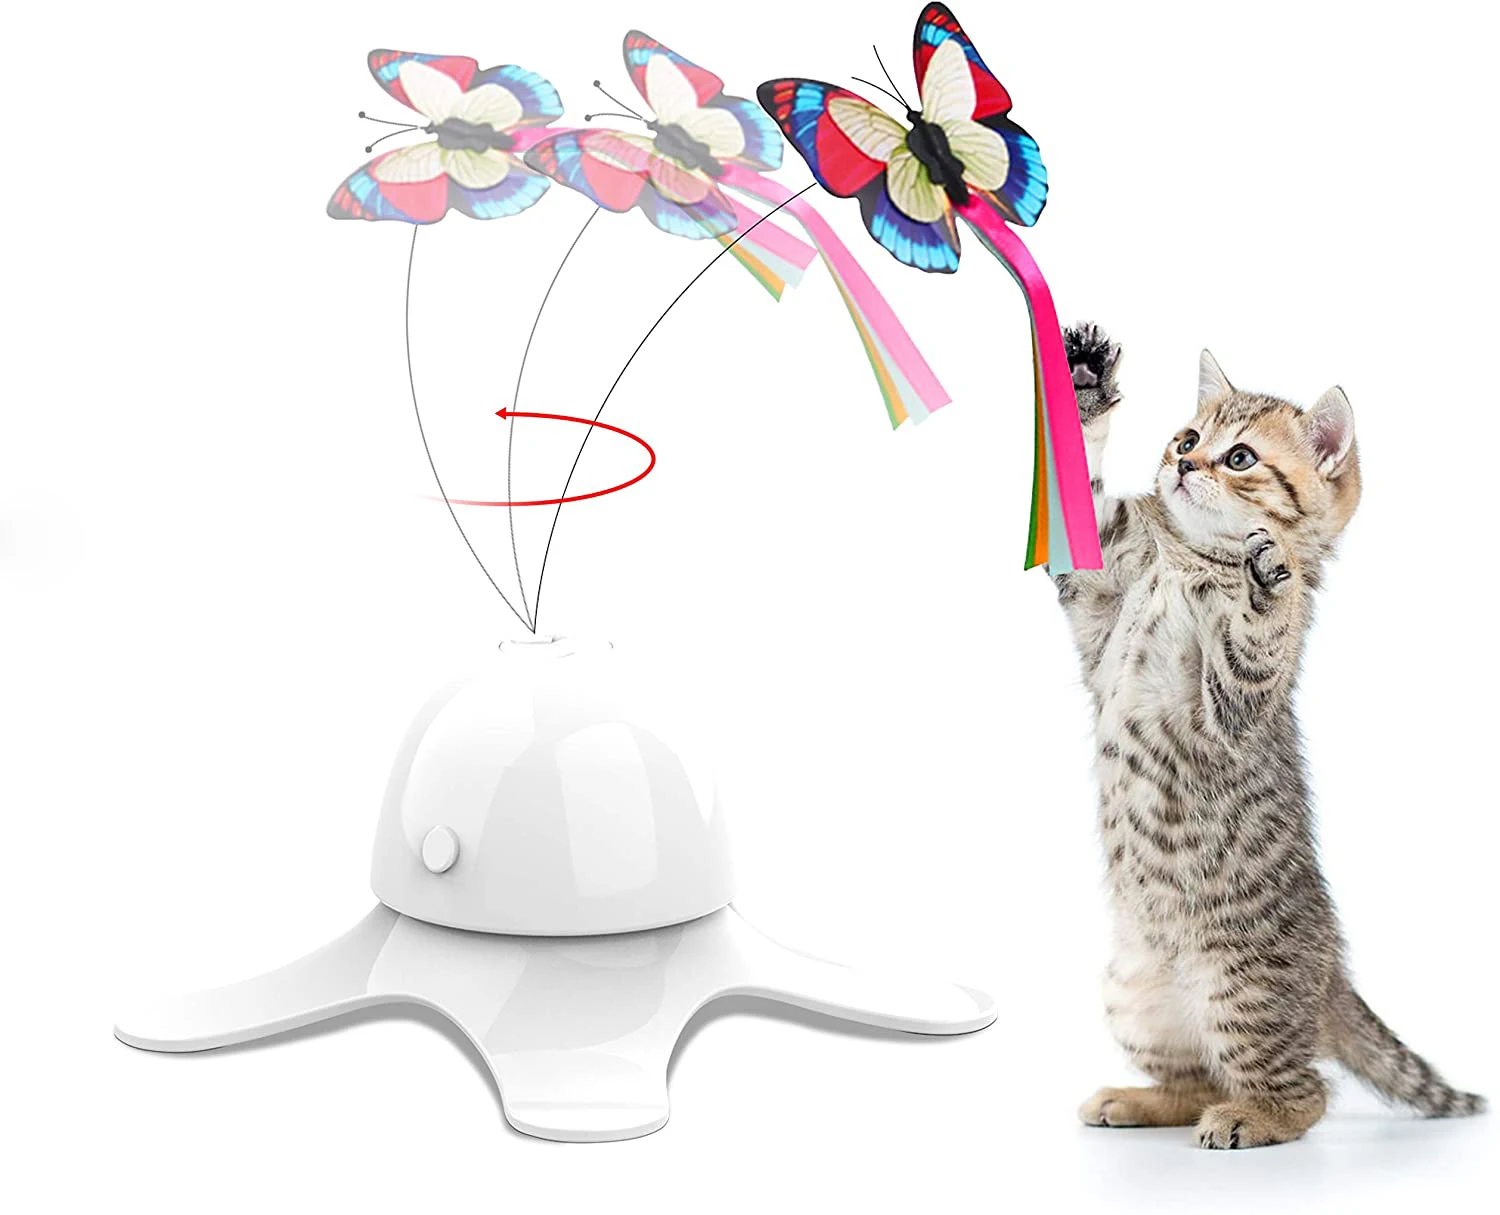 Cat toy automatic electric rotating cat toy colorful butterfly interactive pet dog kitten interactive training pet supplies